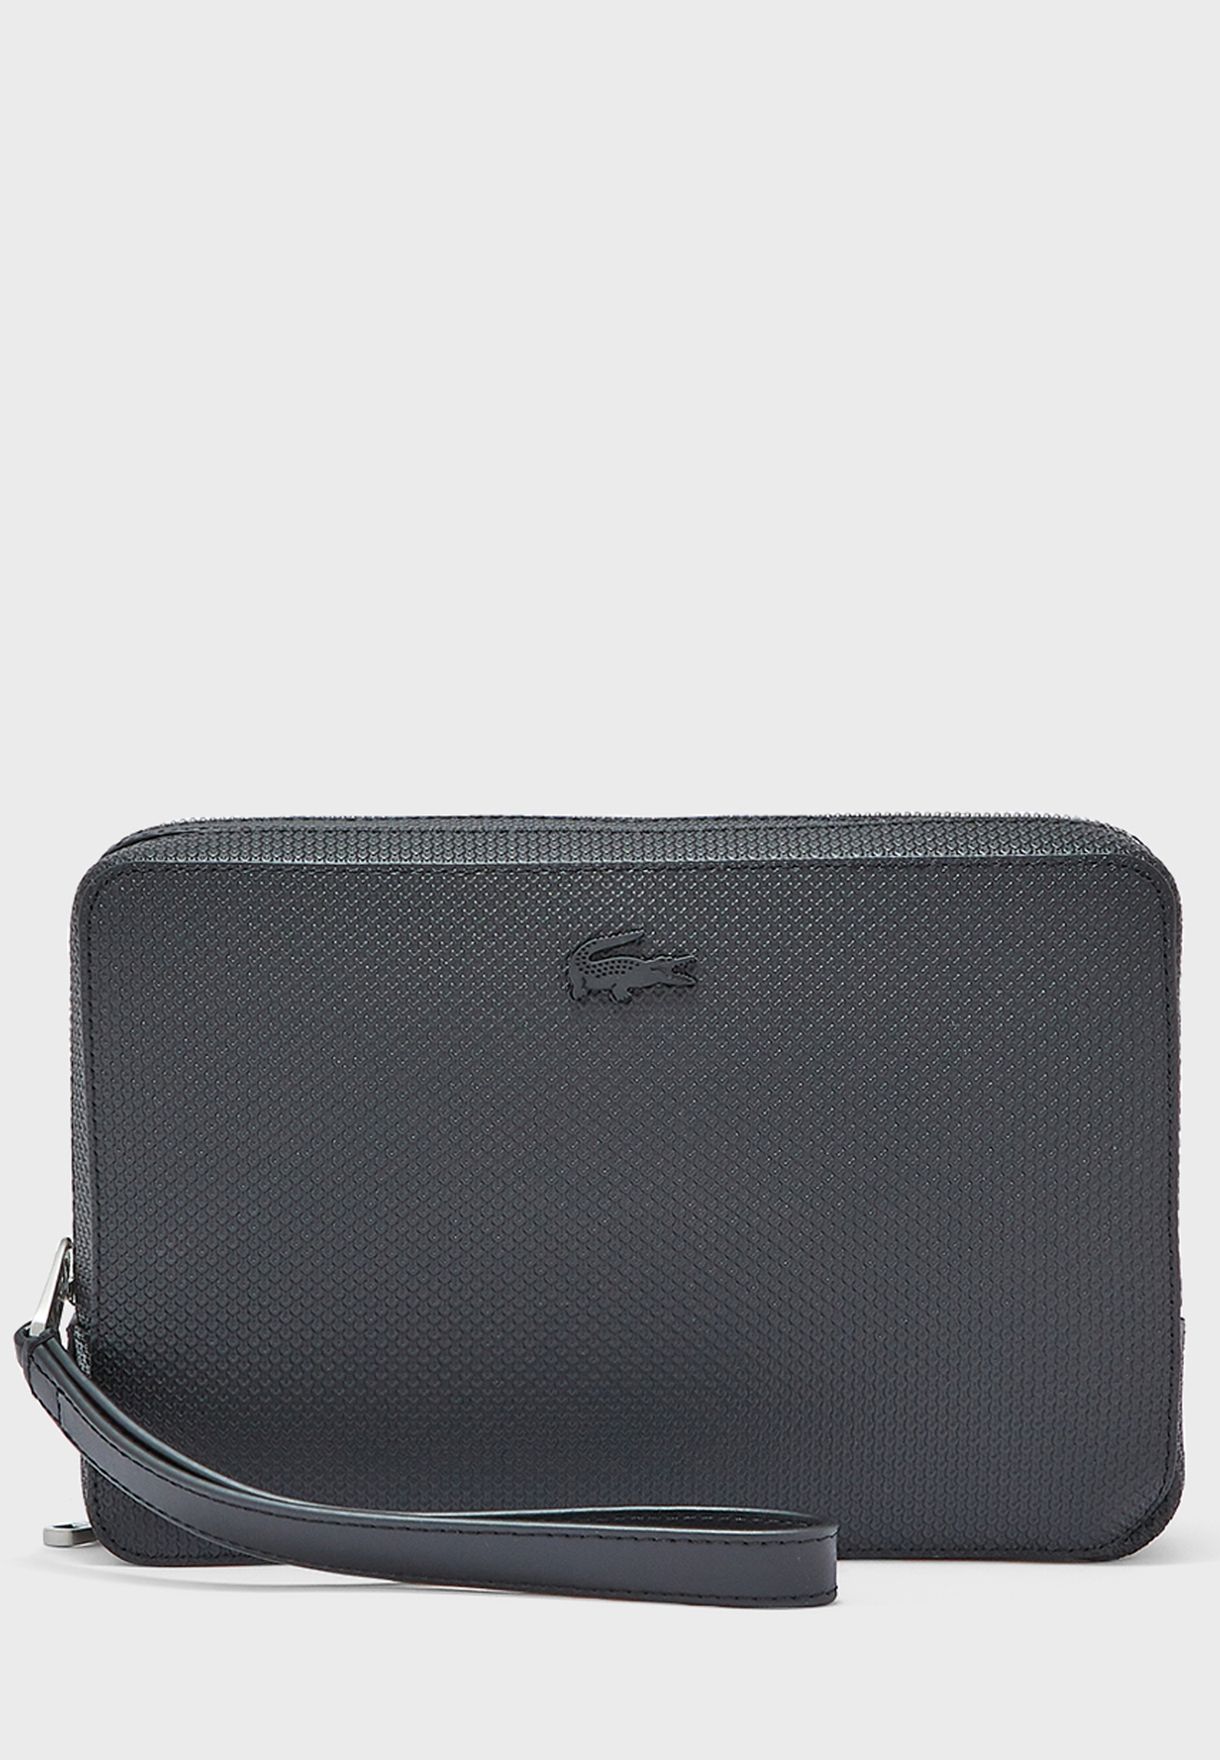 lacoste cosmetic bag